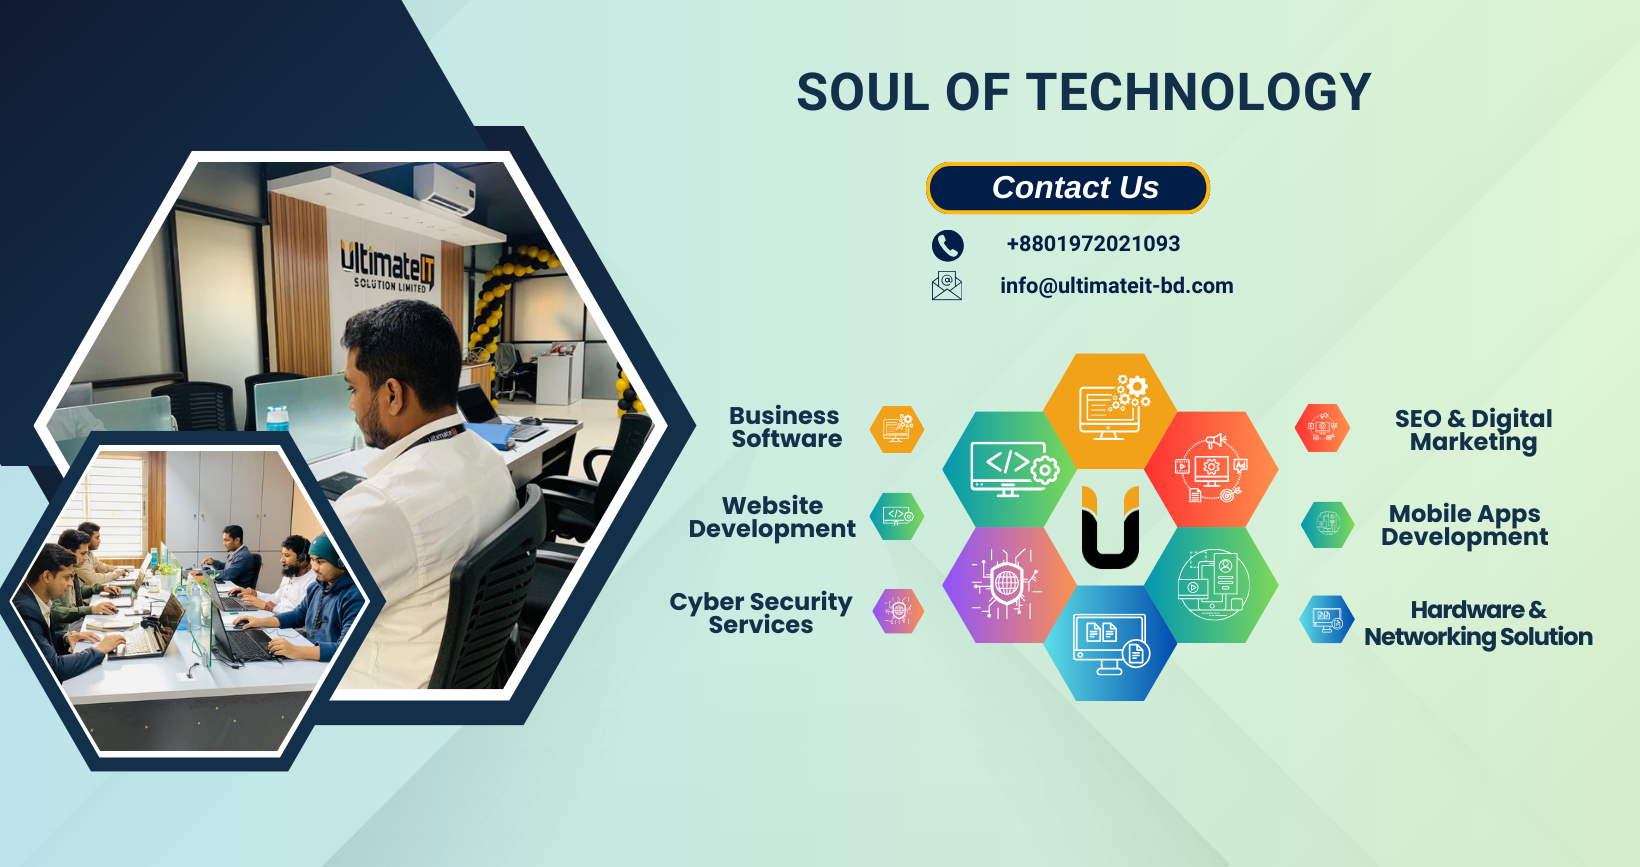 Services of Ultimate IT Solution Ltd